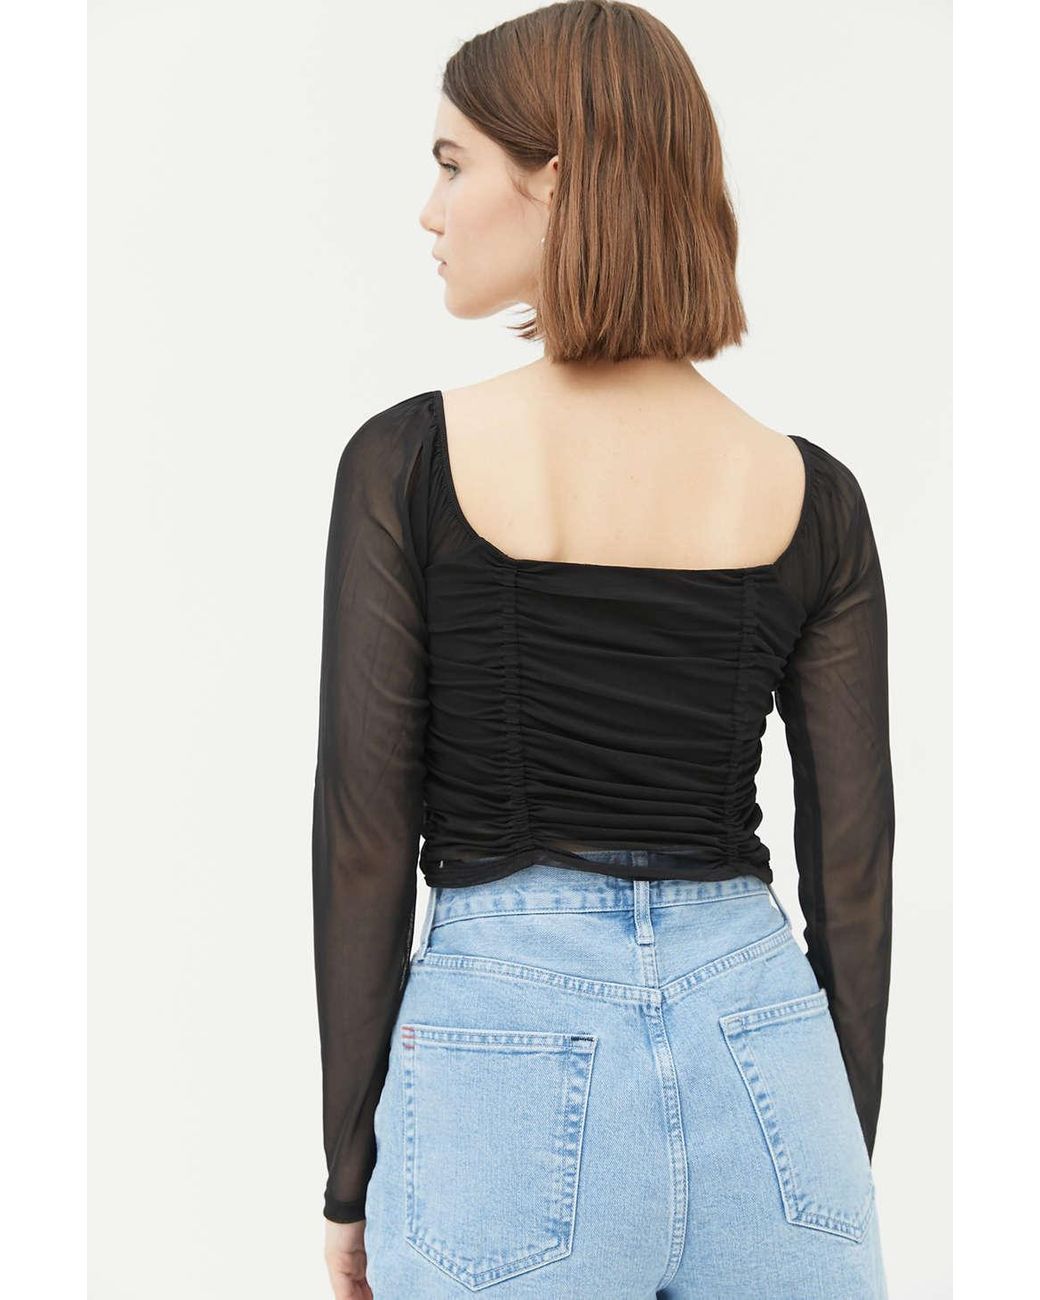 Urban Outfitters Uo Liana Mesh Long Sleeve Cropped Top in Black